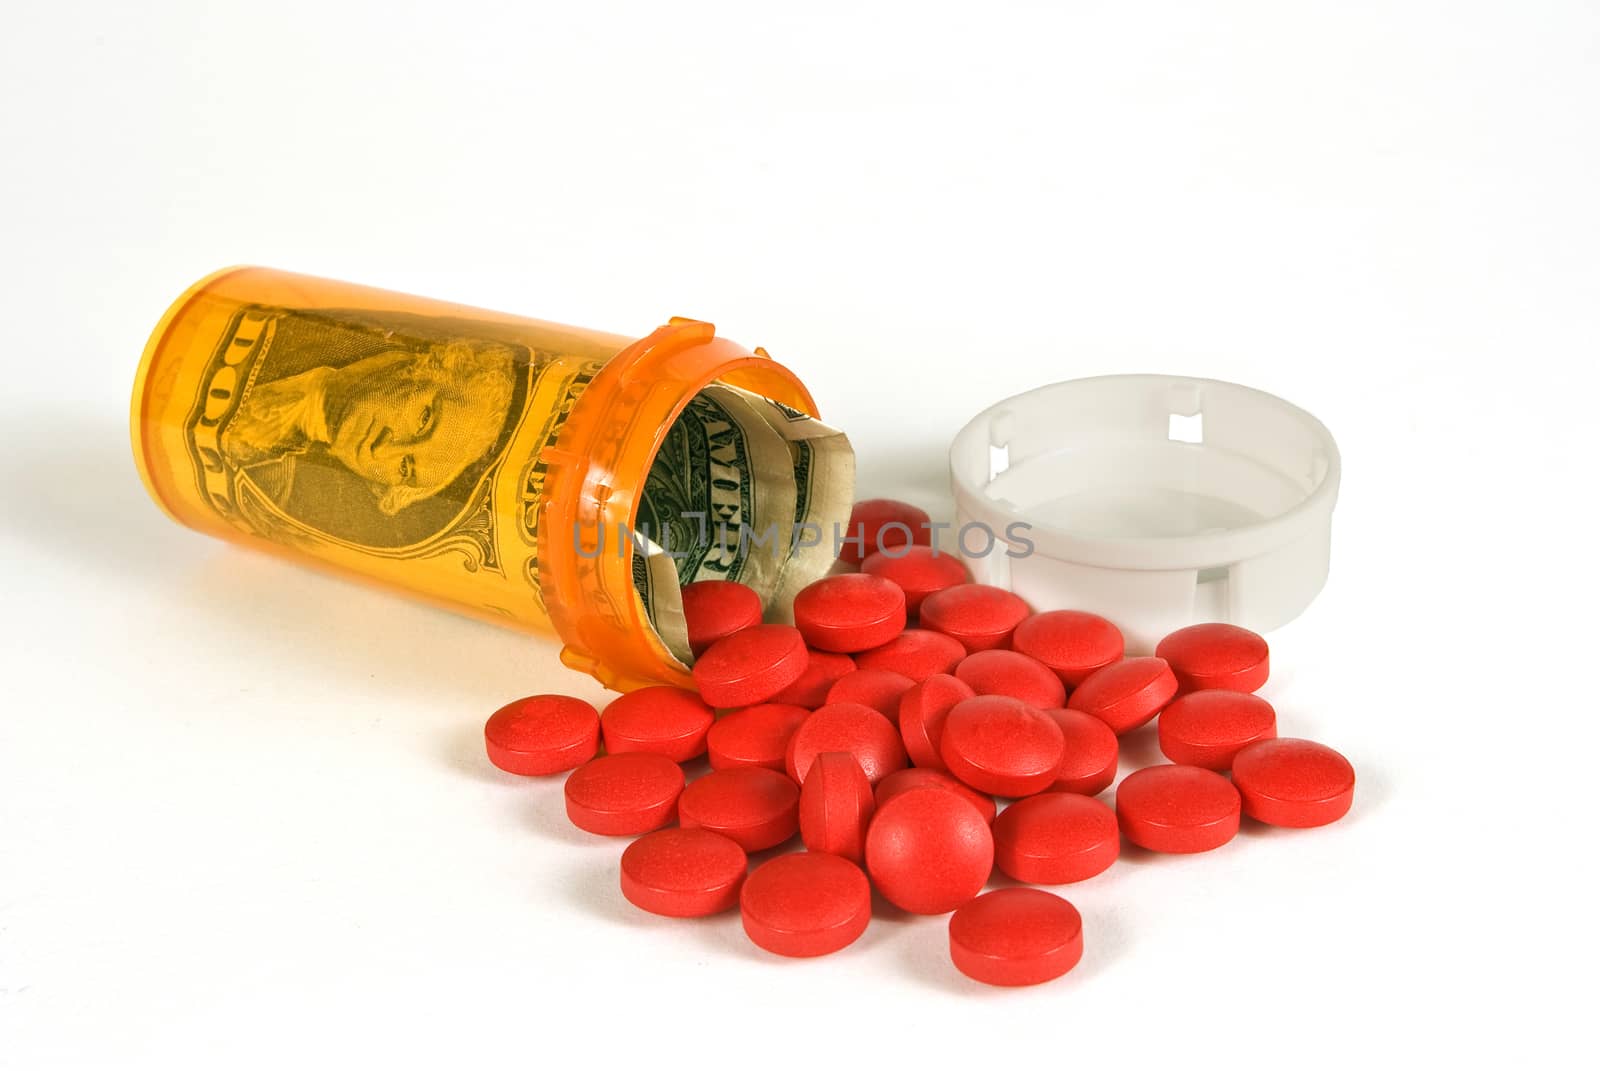 Horizontal shot of pill bottle with money inside and red pills spilling out.